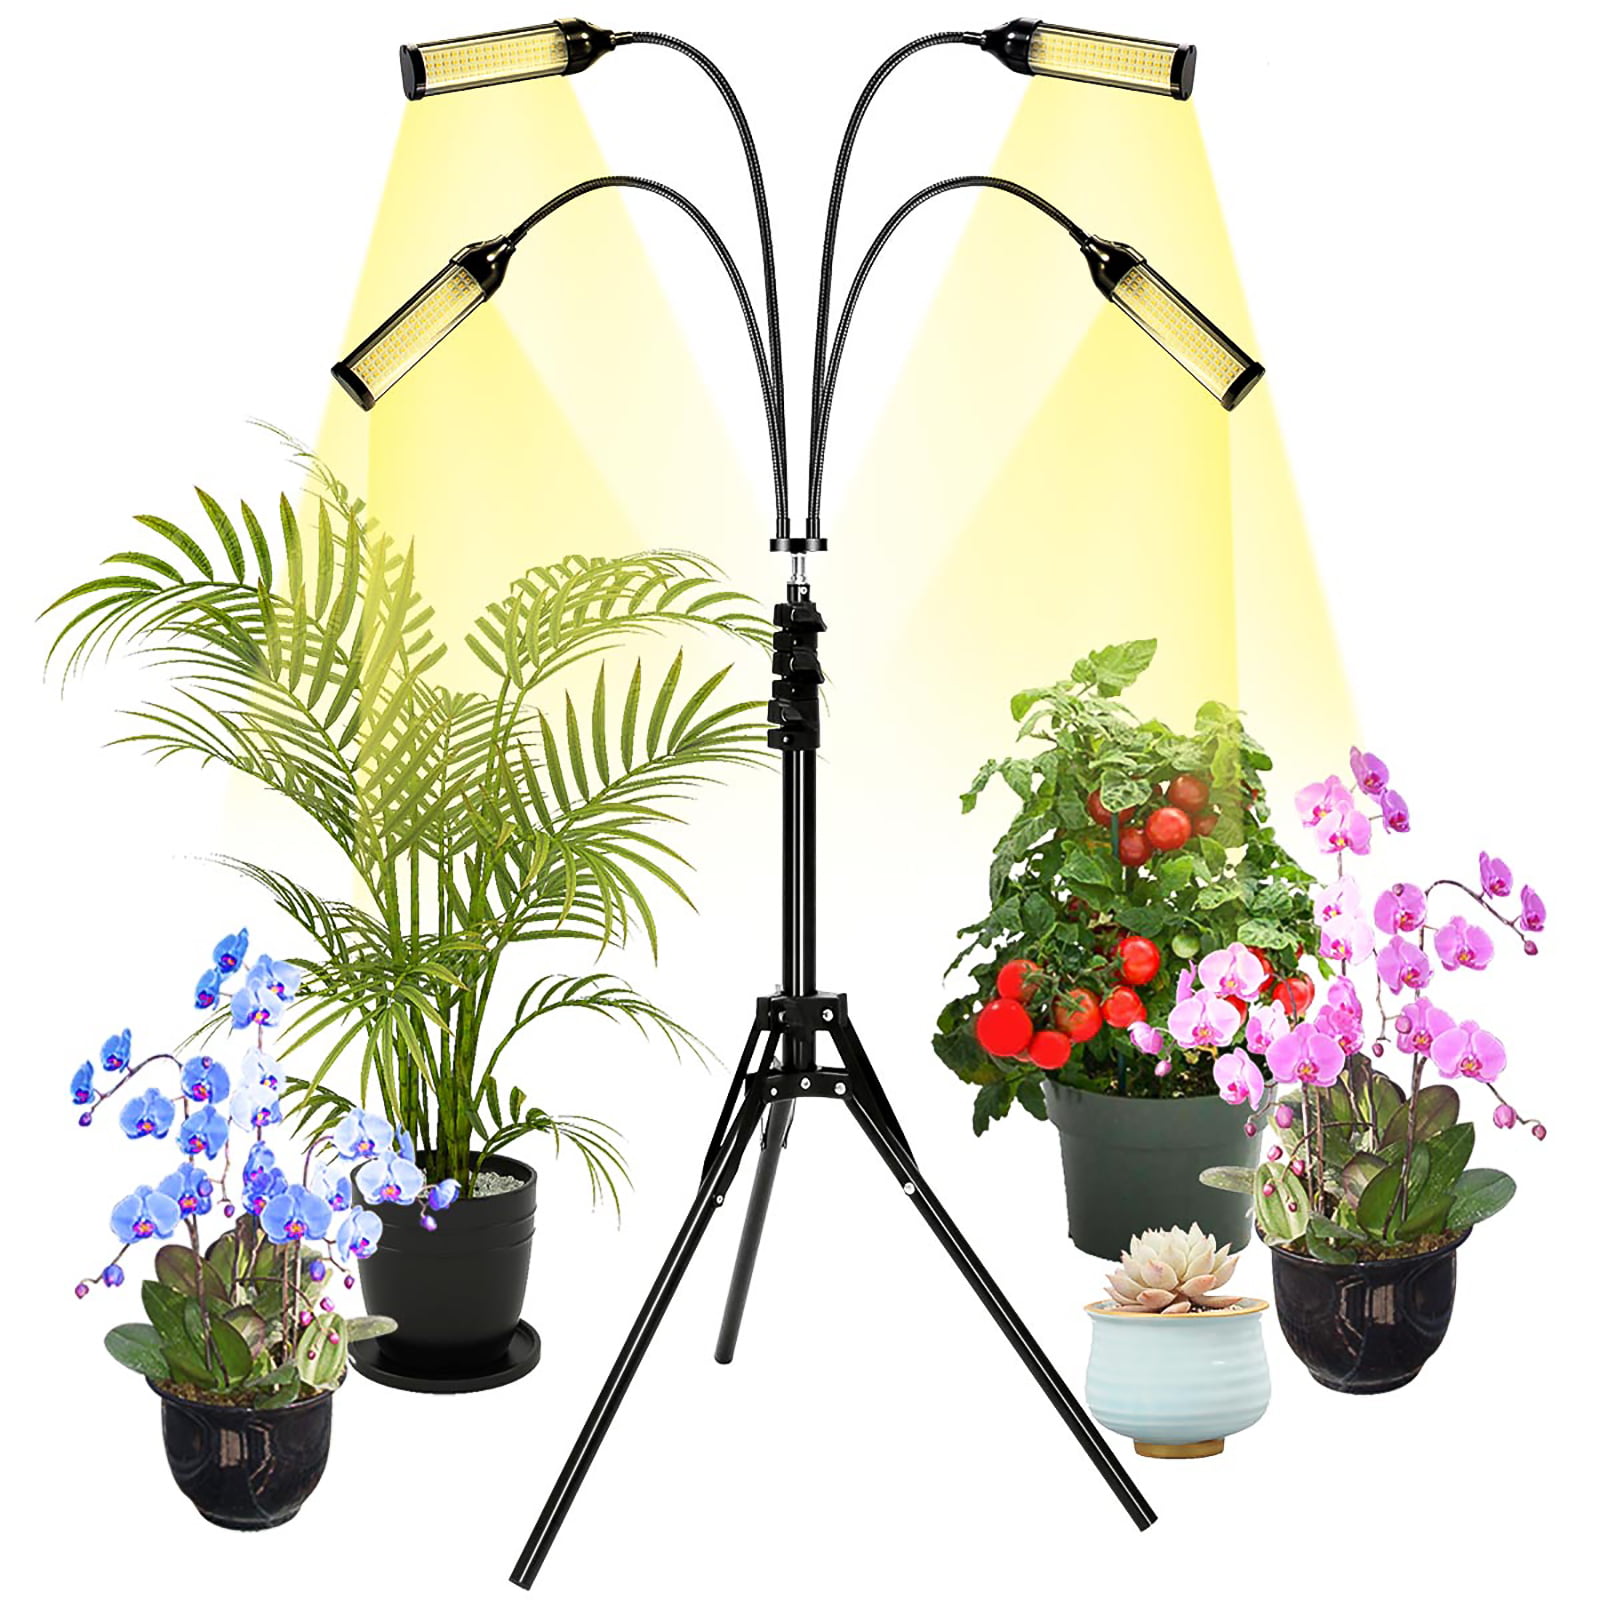 2/4 Heads LED Grow Light Plant Growing Lamp Lights for Indoor Plants Hydroponics 